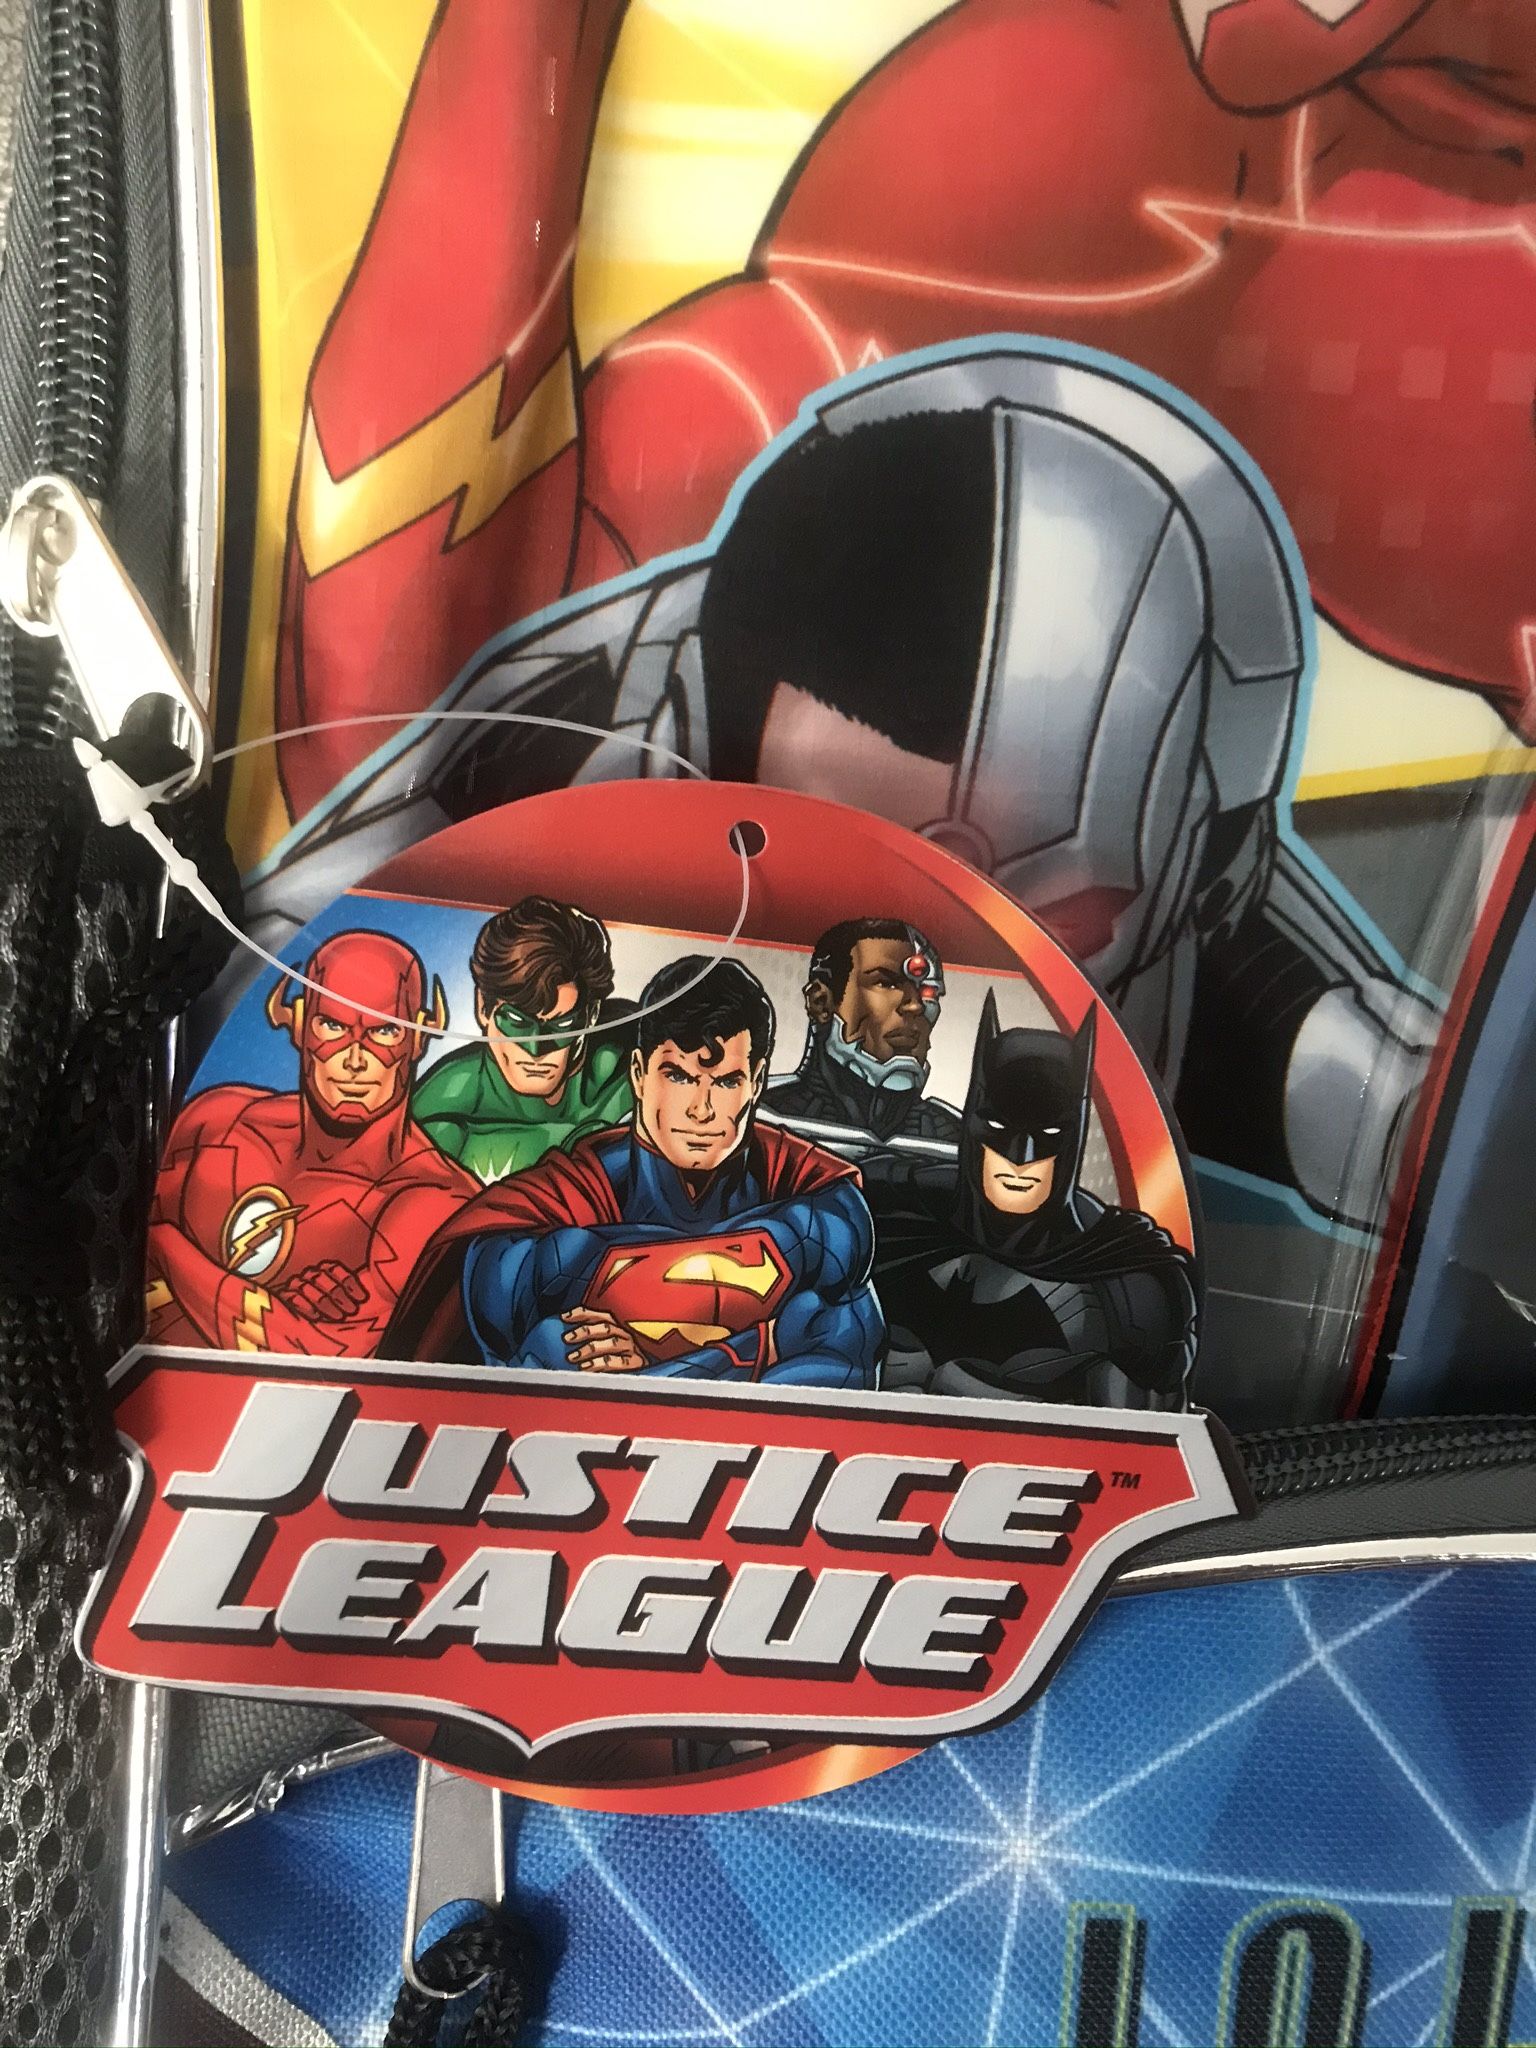 Brand New! Join the League Backpack